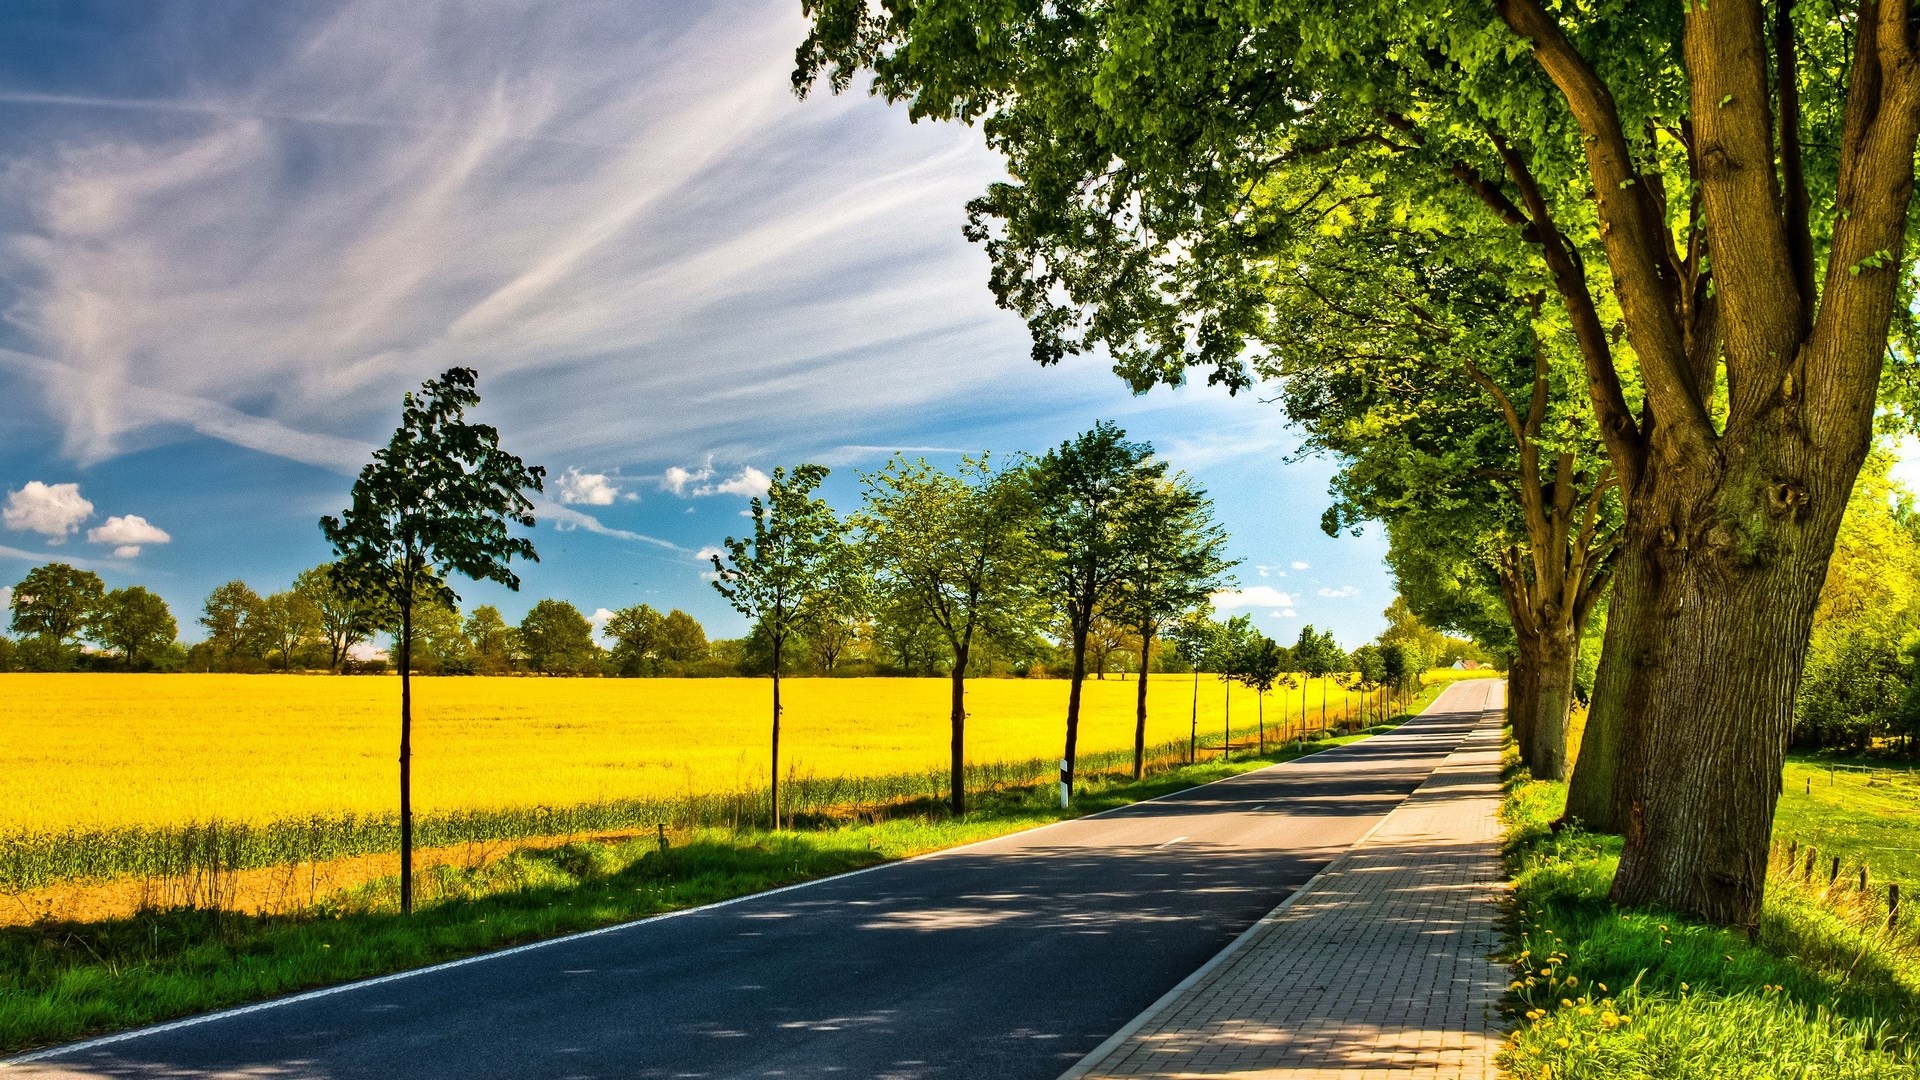 hd wallpapers 1080p,natural landscape,nature,sky,road,tree